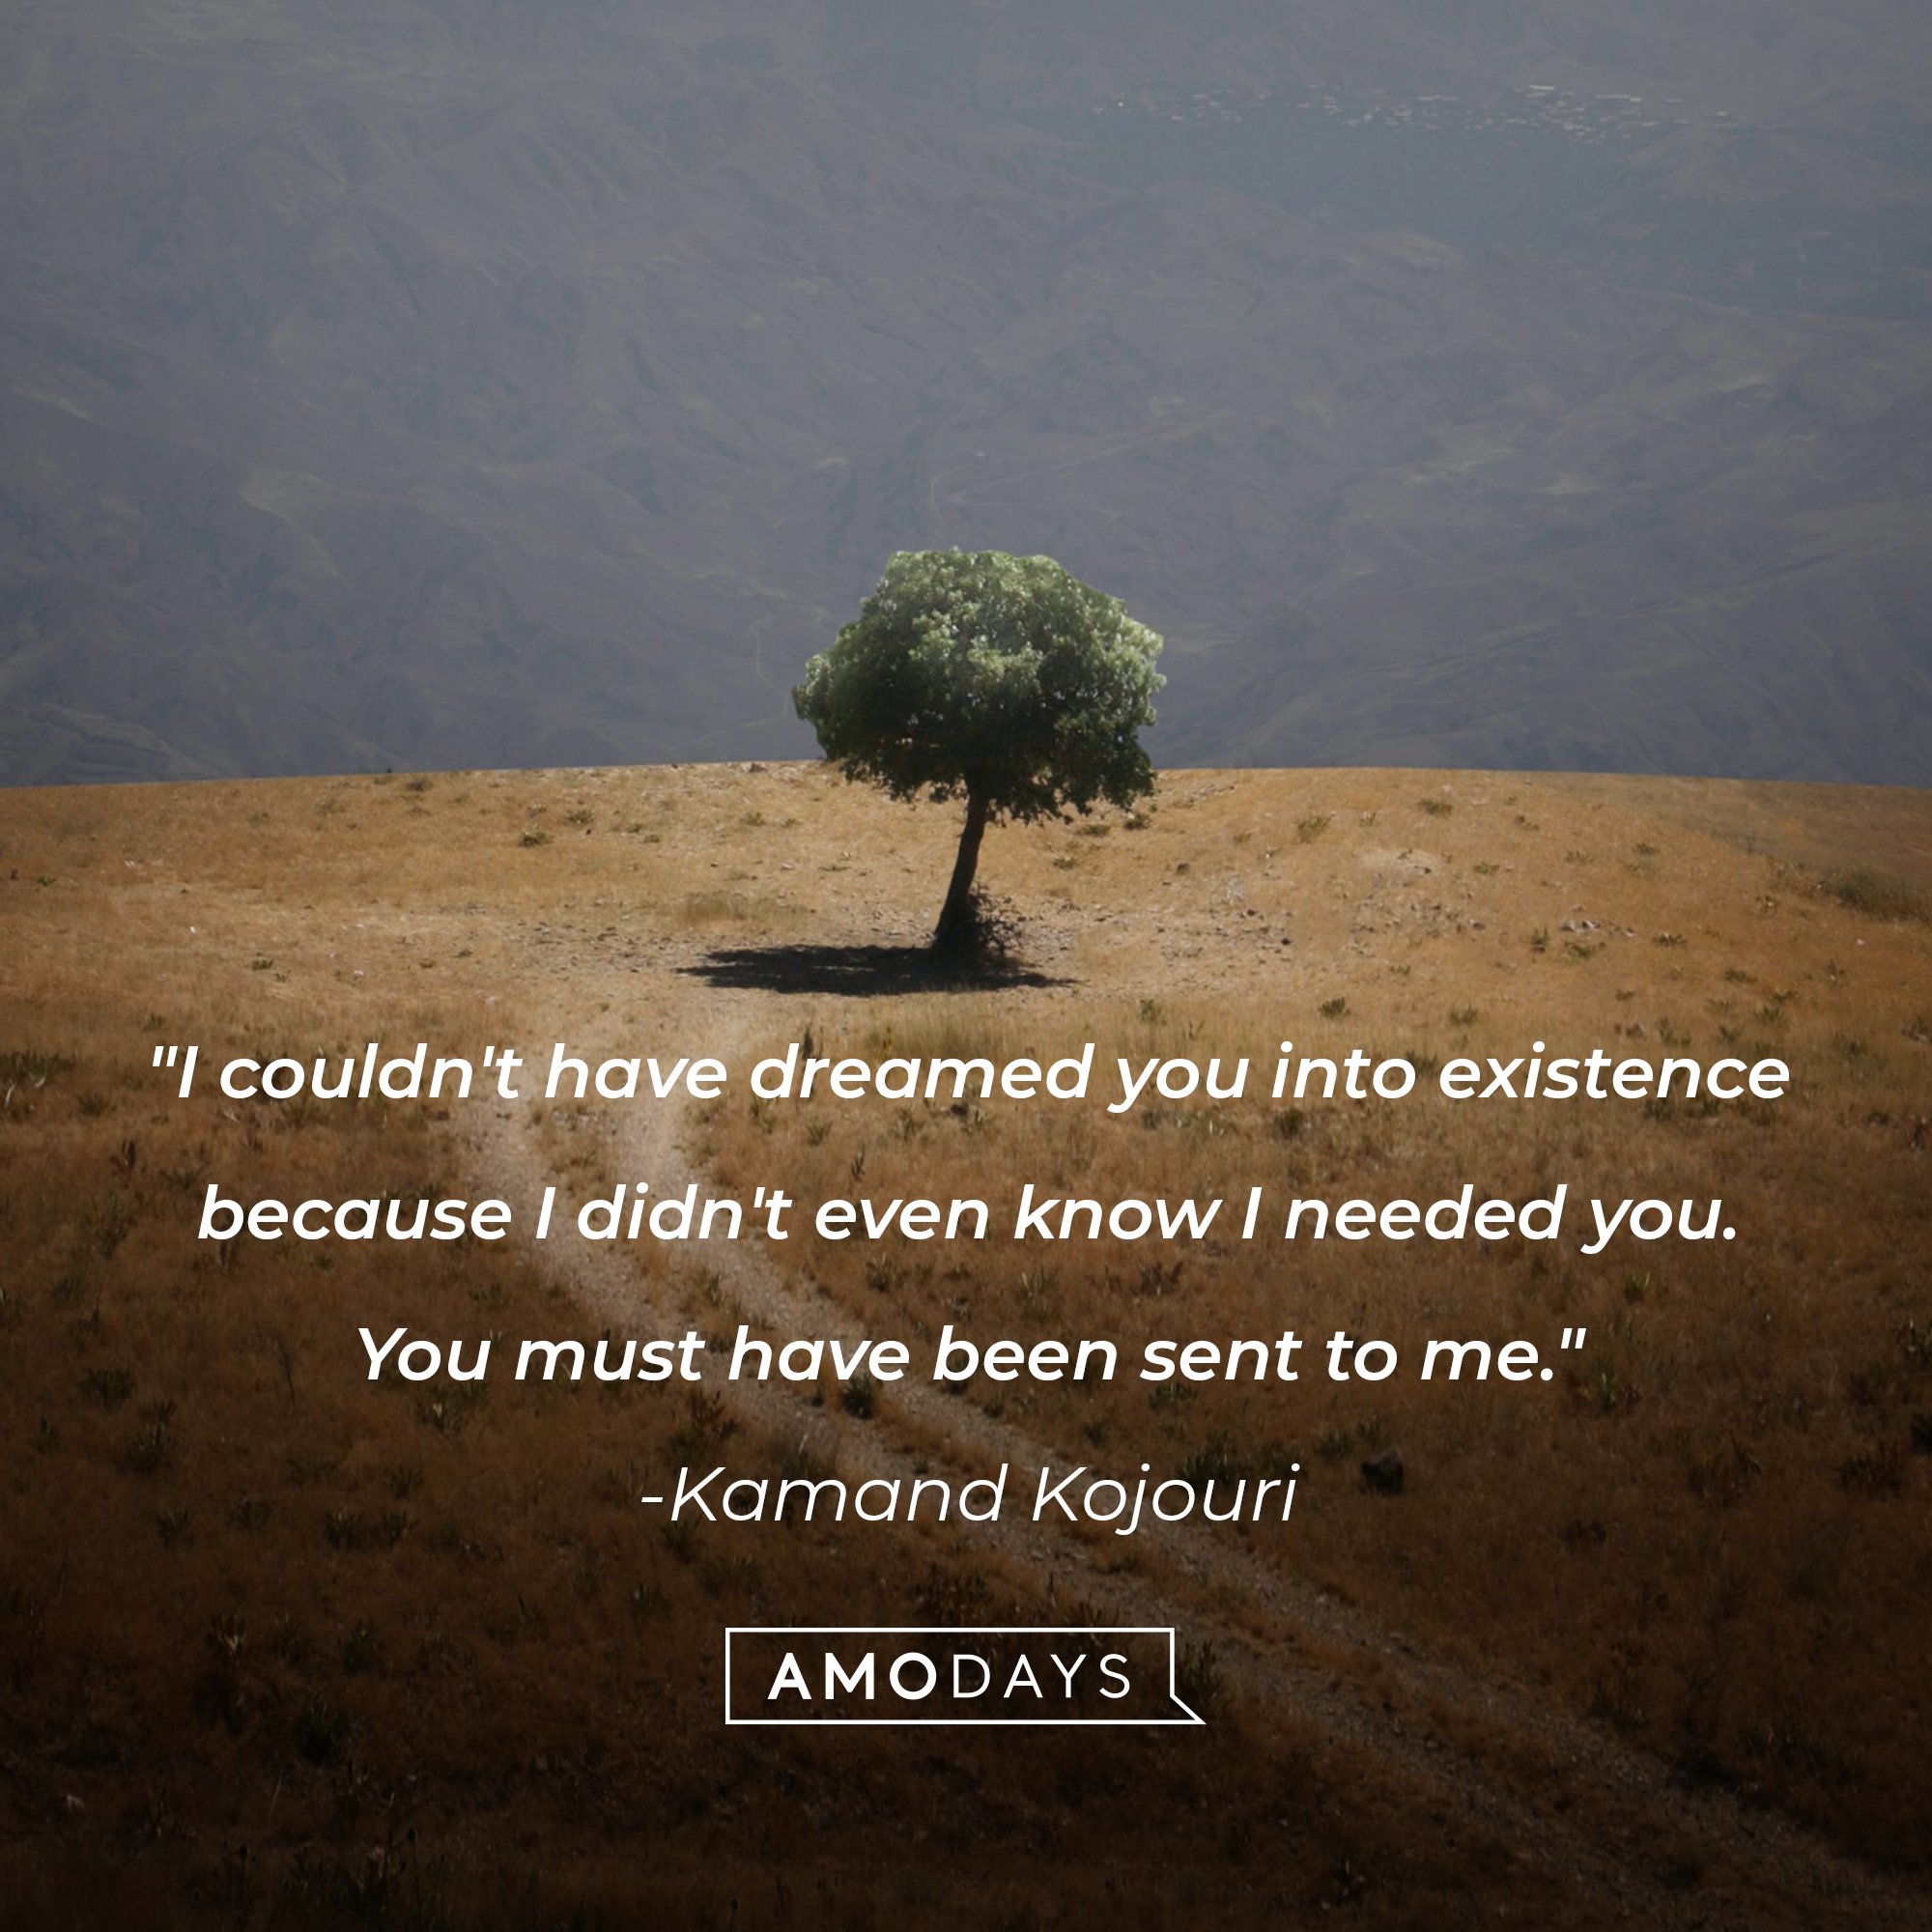 Kamand Kojouri’s quote: "I couldn't have dreamed you into existence because I didn't even know I needed you. You must have been sent to me." | Image: AmoDays